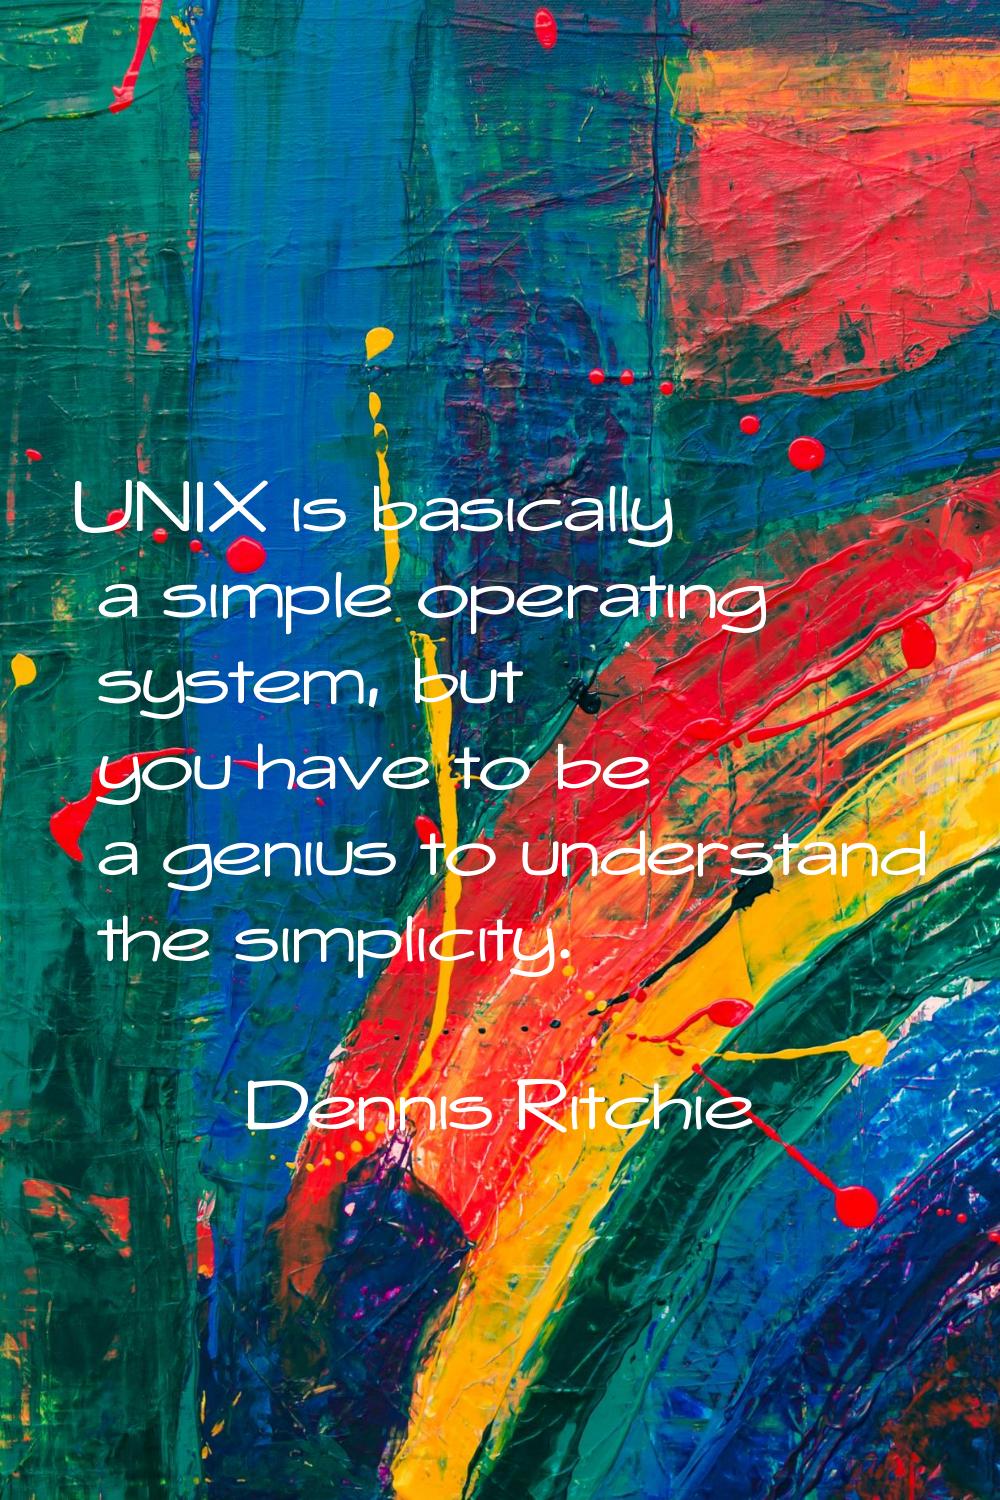 UNIX is basically a simple operating system, but you have to be a genius to understand the simplici